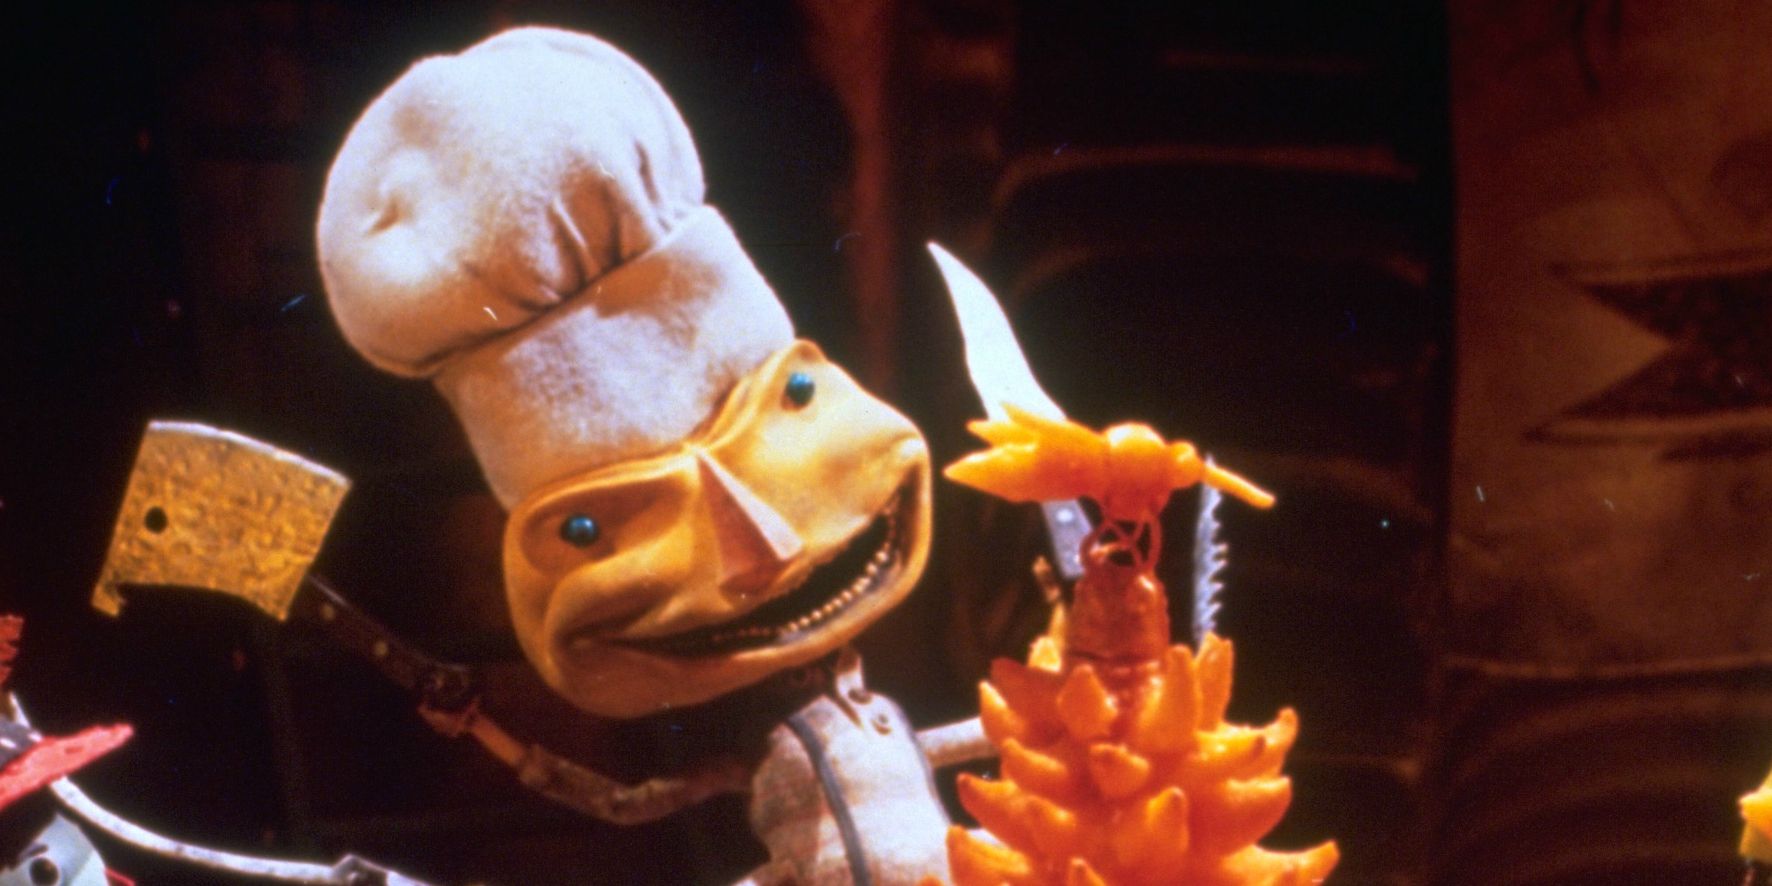 Centipede as a chef in James and the Giant Peach